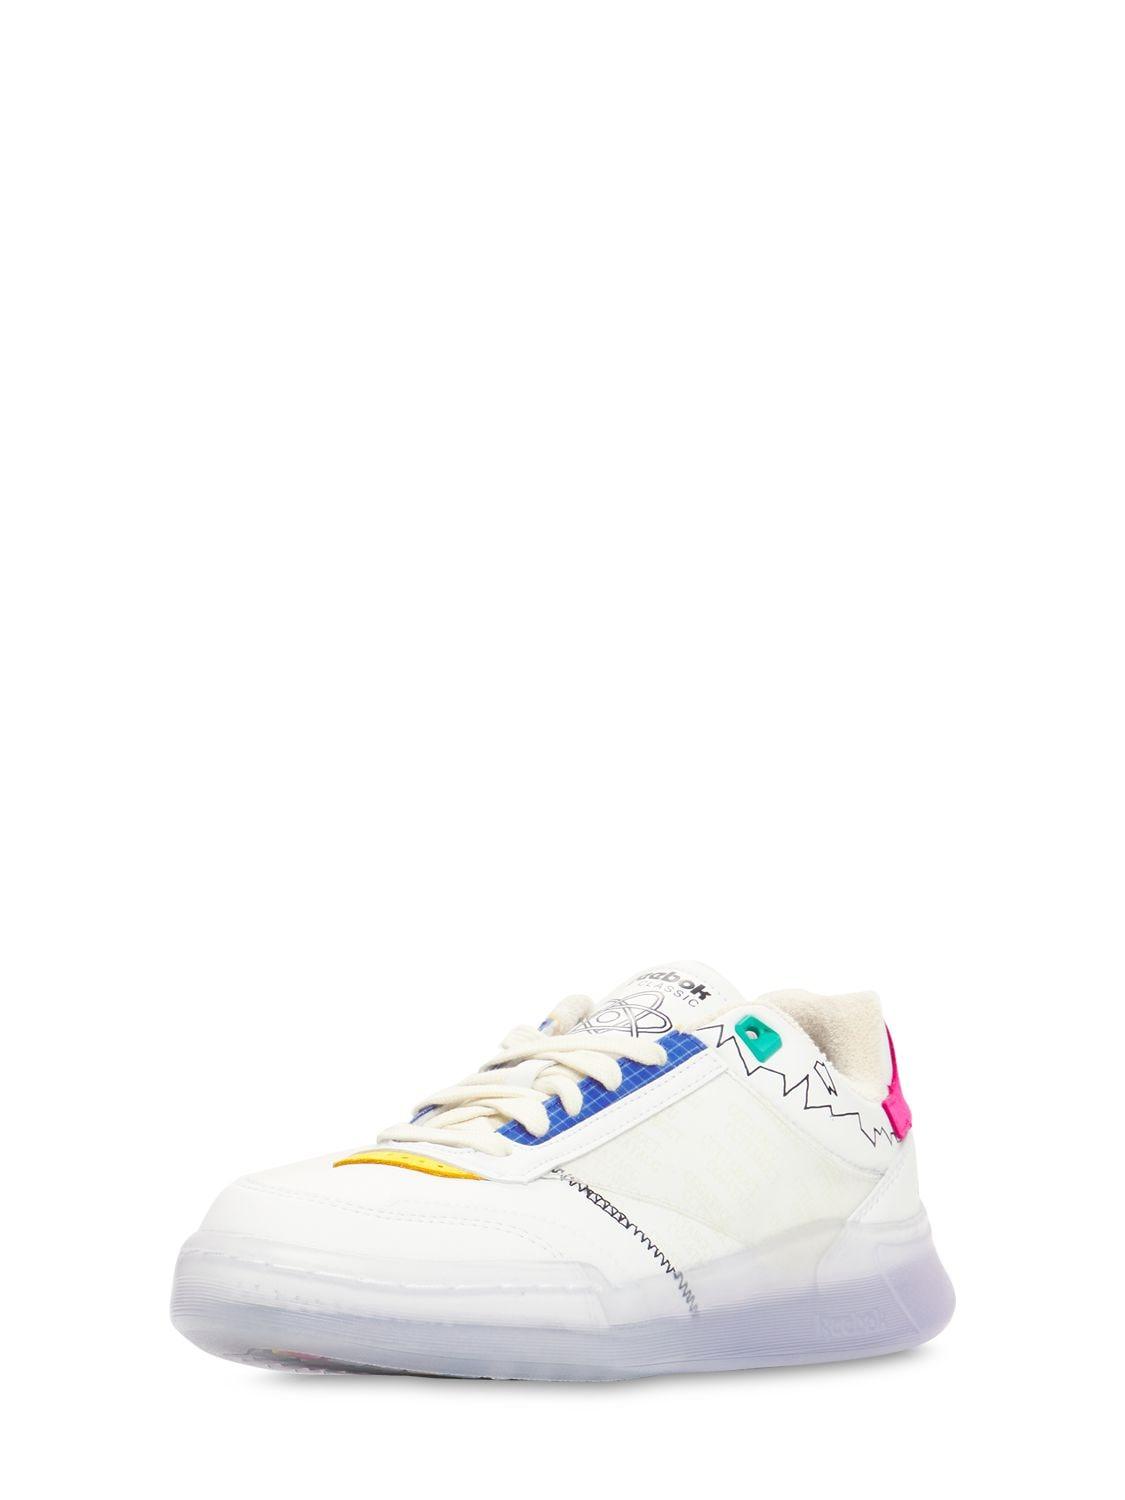 Reebok Synthetic Jurassic Park Club C Legacy Sneakers in White for 